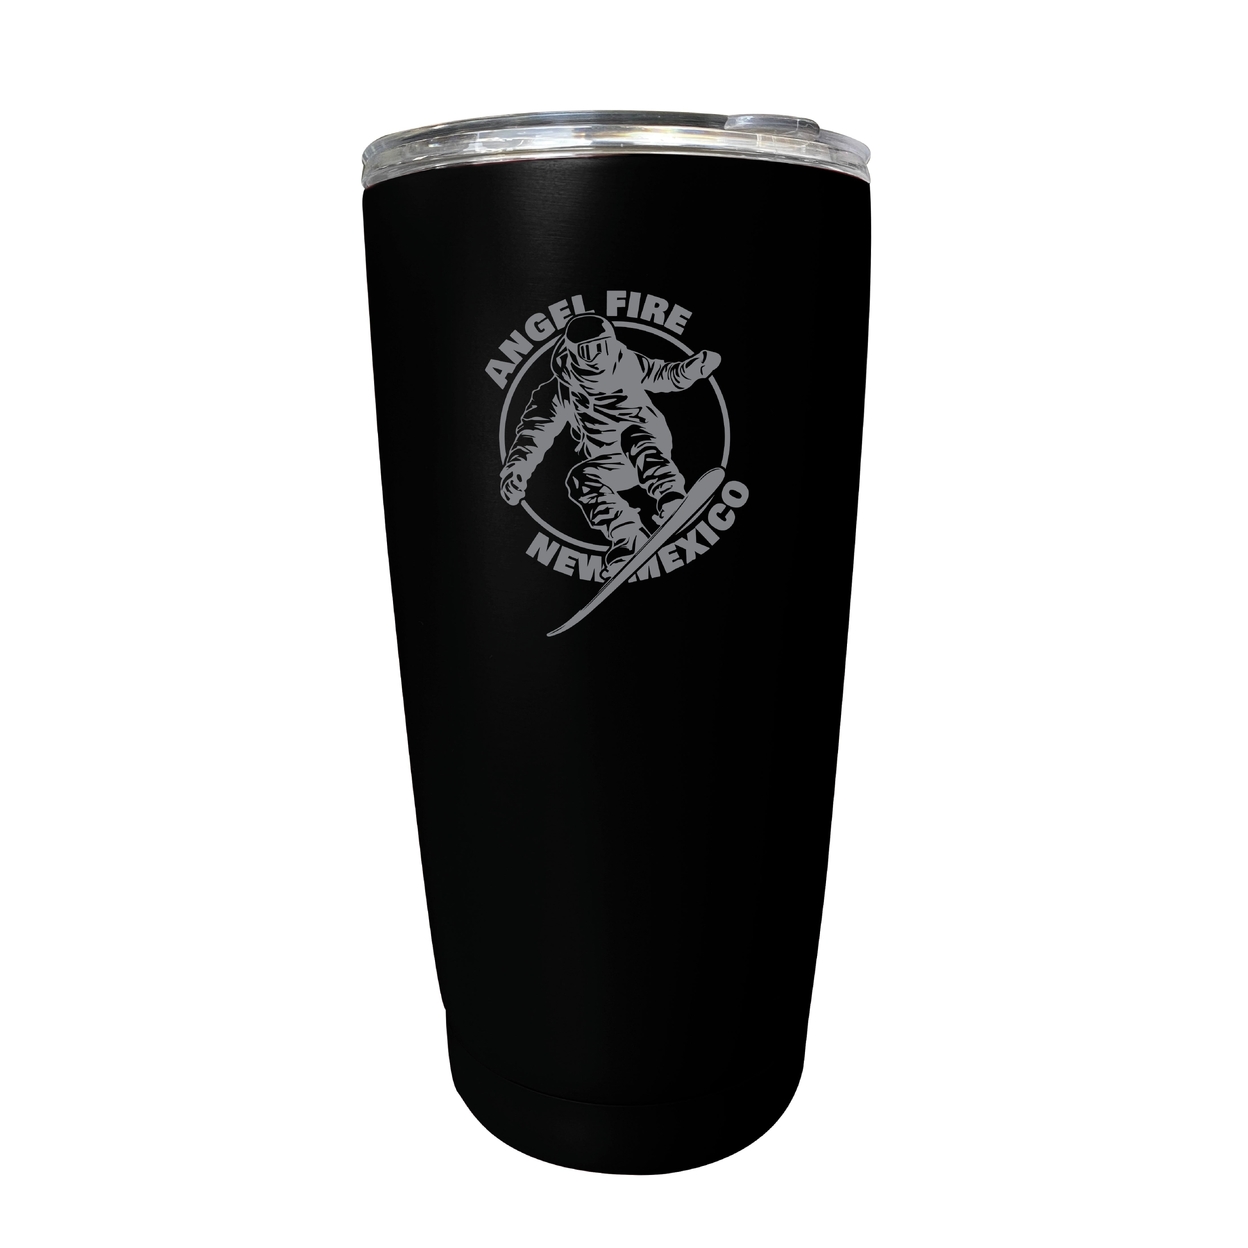 Angel Fire New Mexico Souvenir 16 Oz Engraved Stainless Steel Insulated Tumbler - Black,,Single Unit